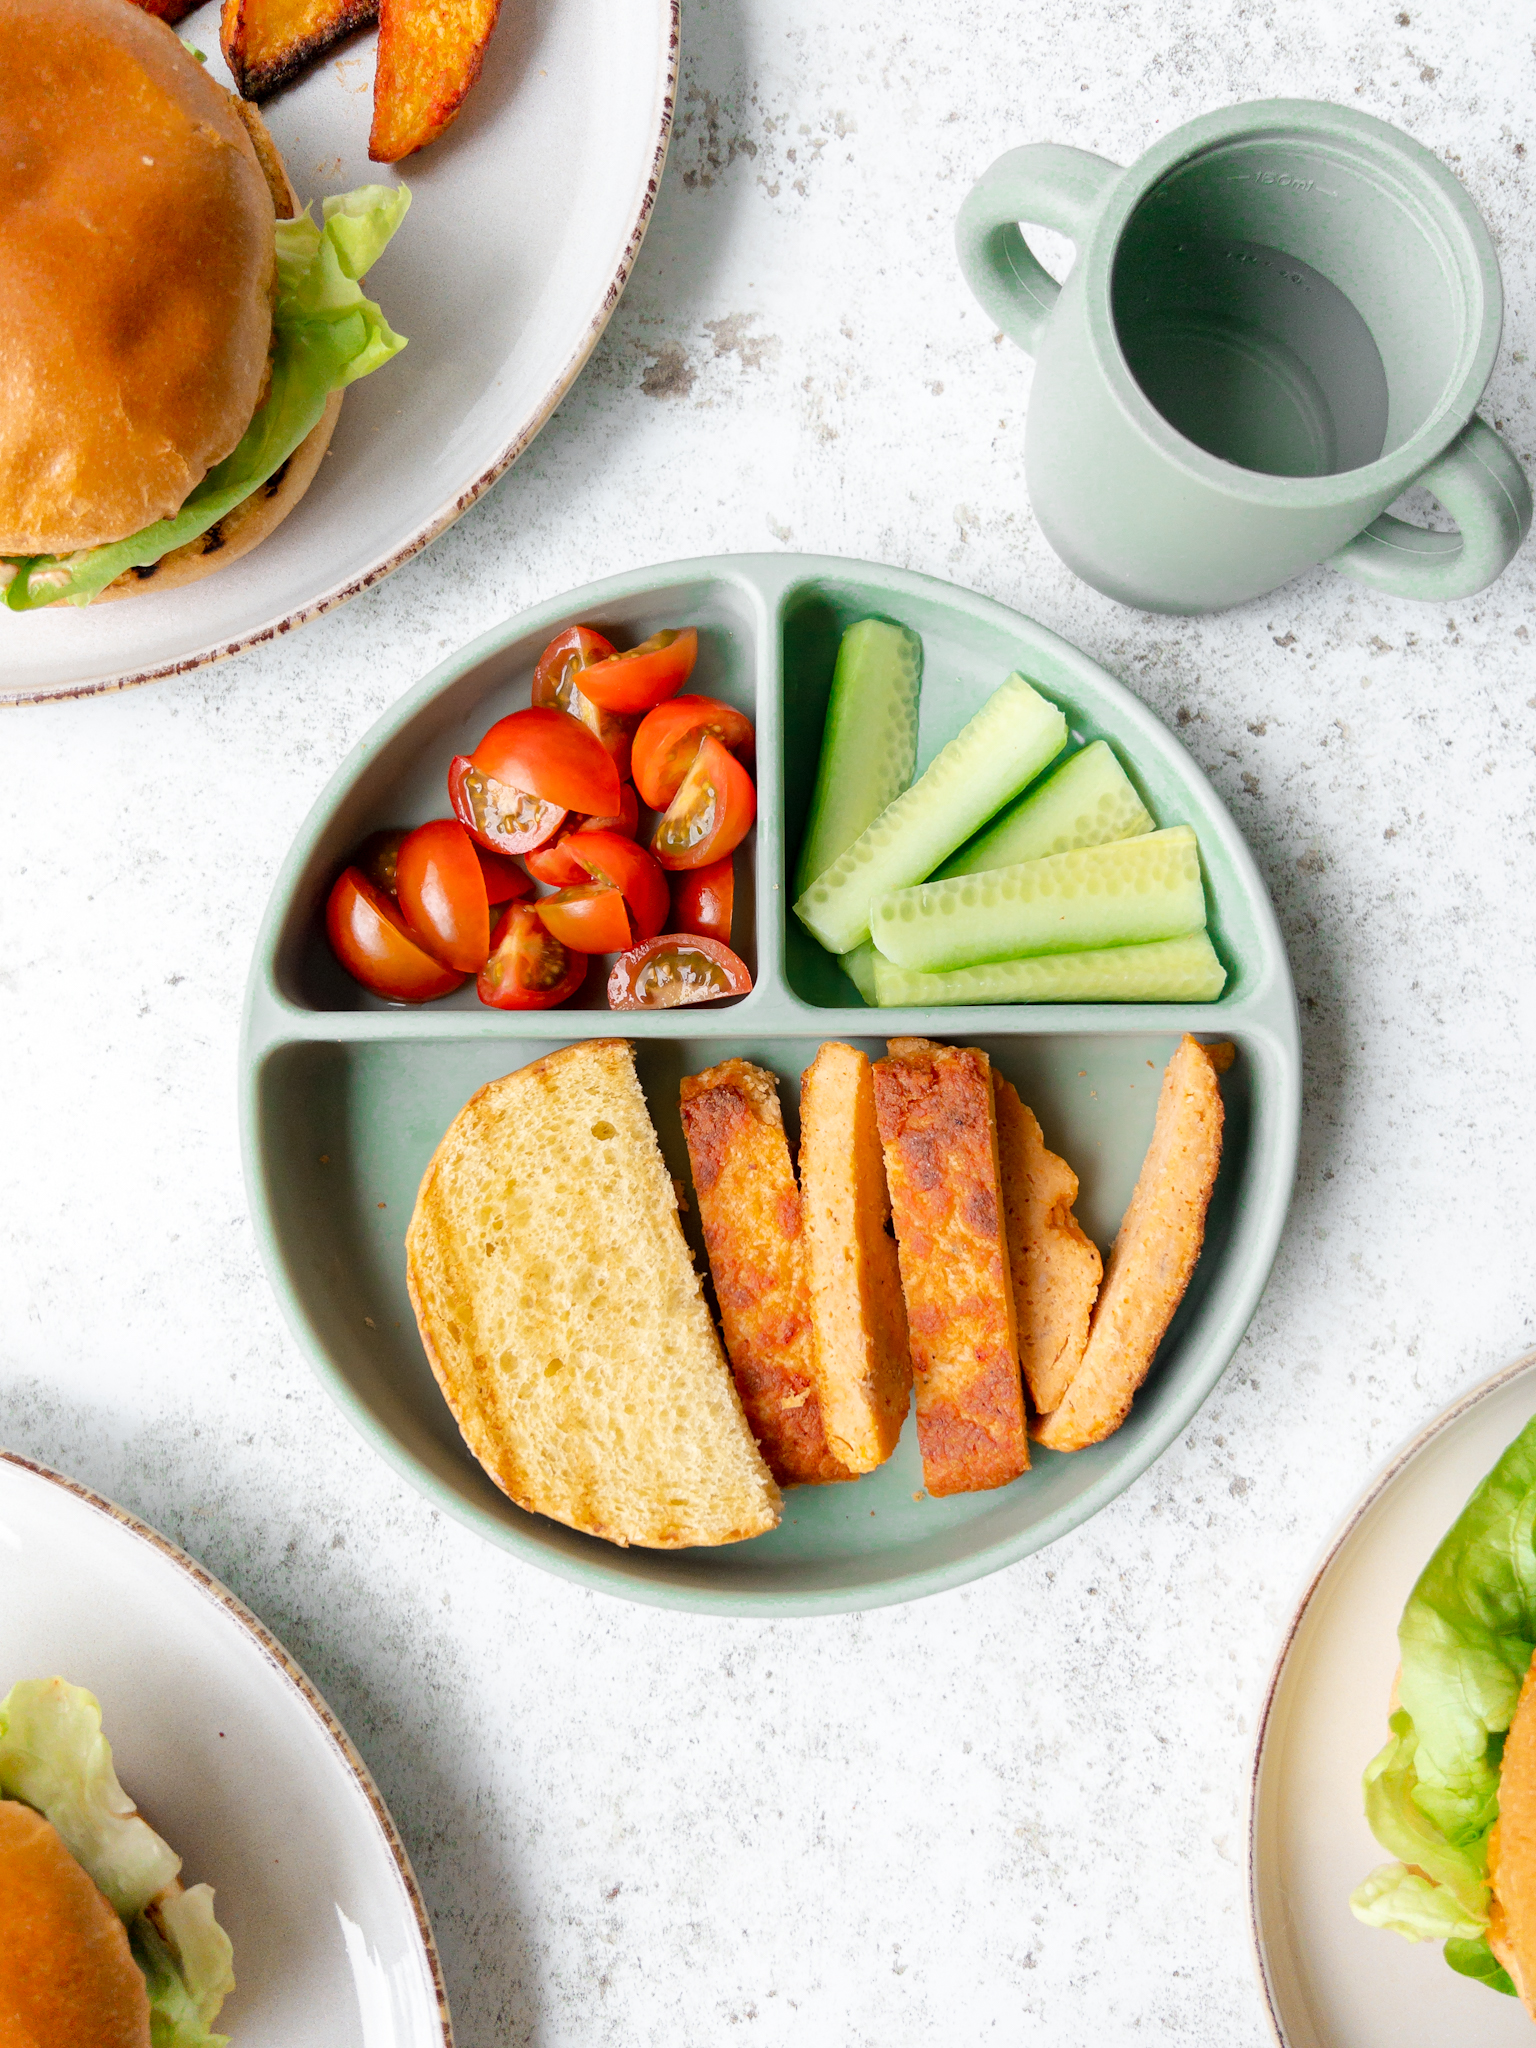 Family meals suitable for baby weaning